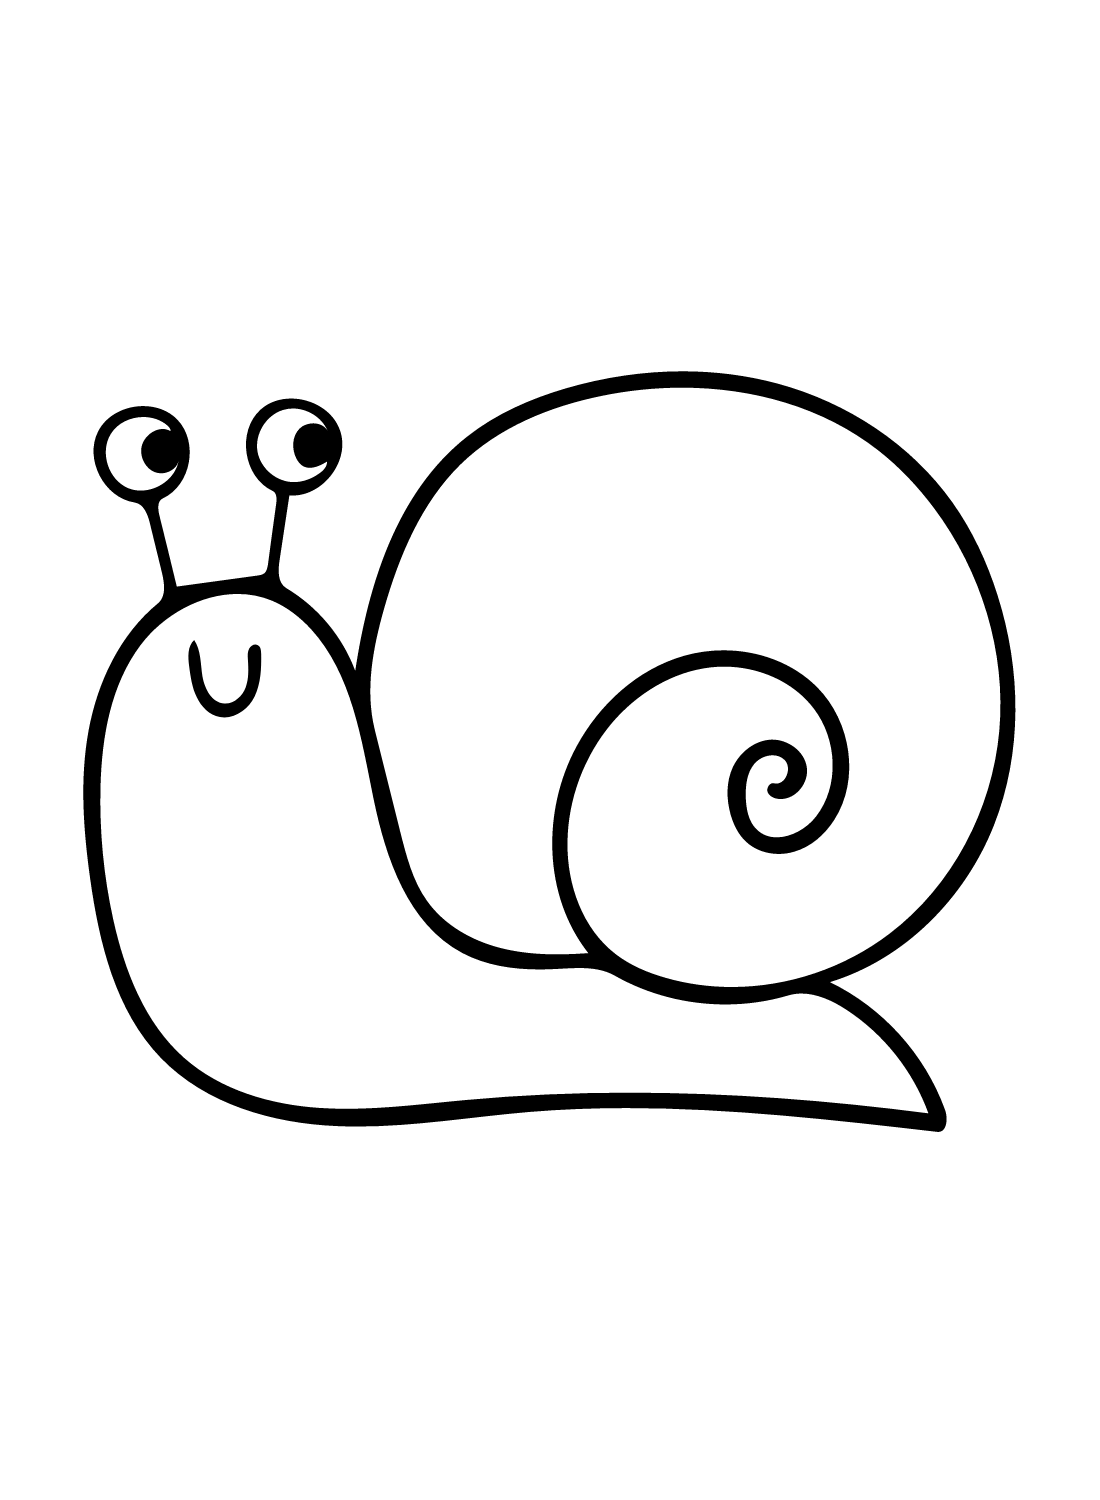 Snail Drawing from Snail